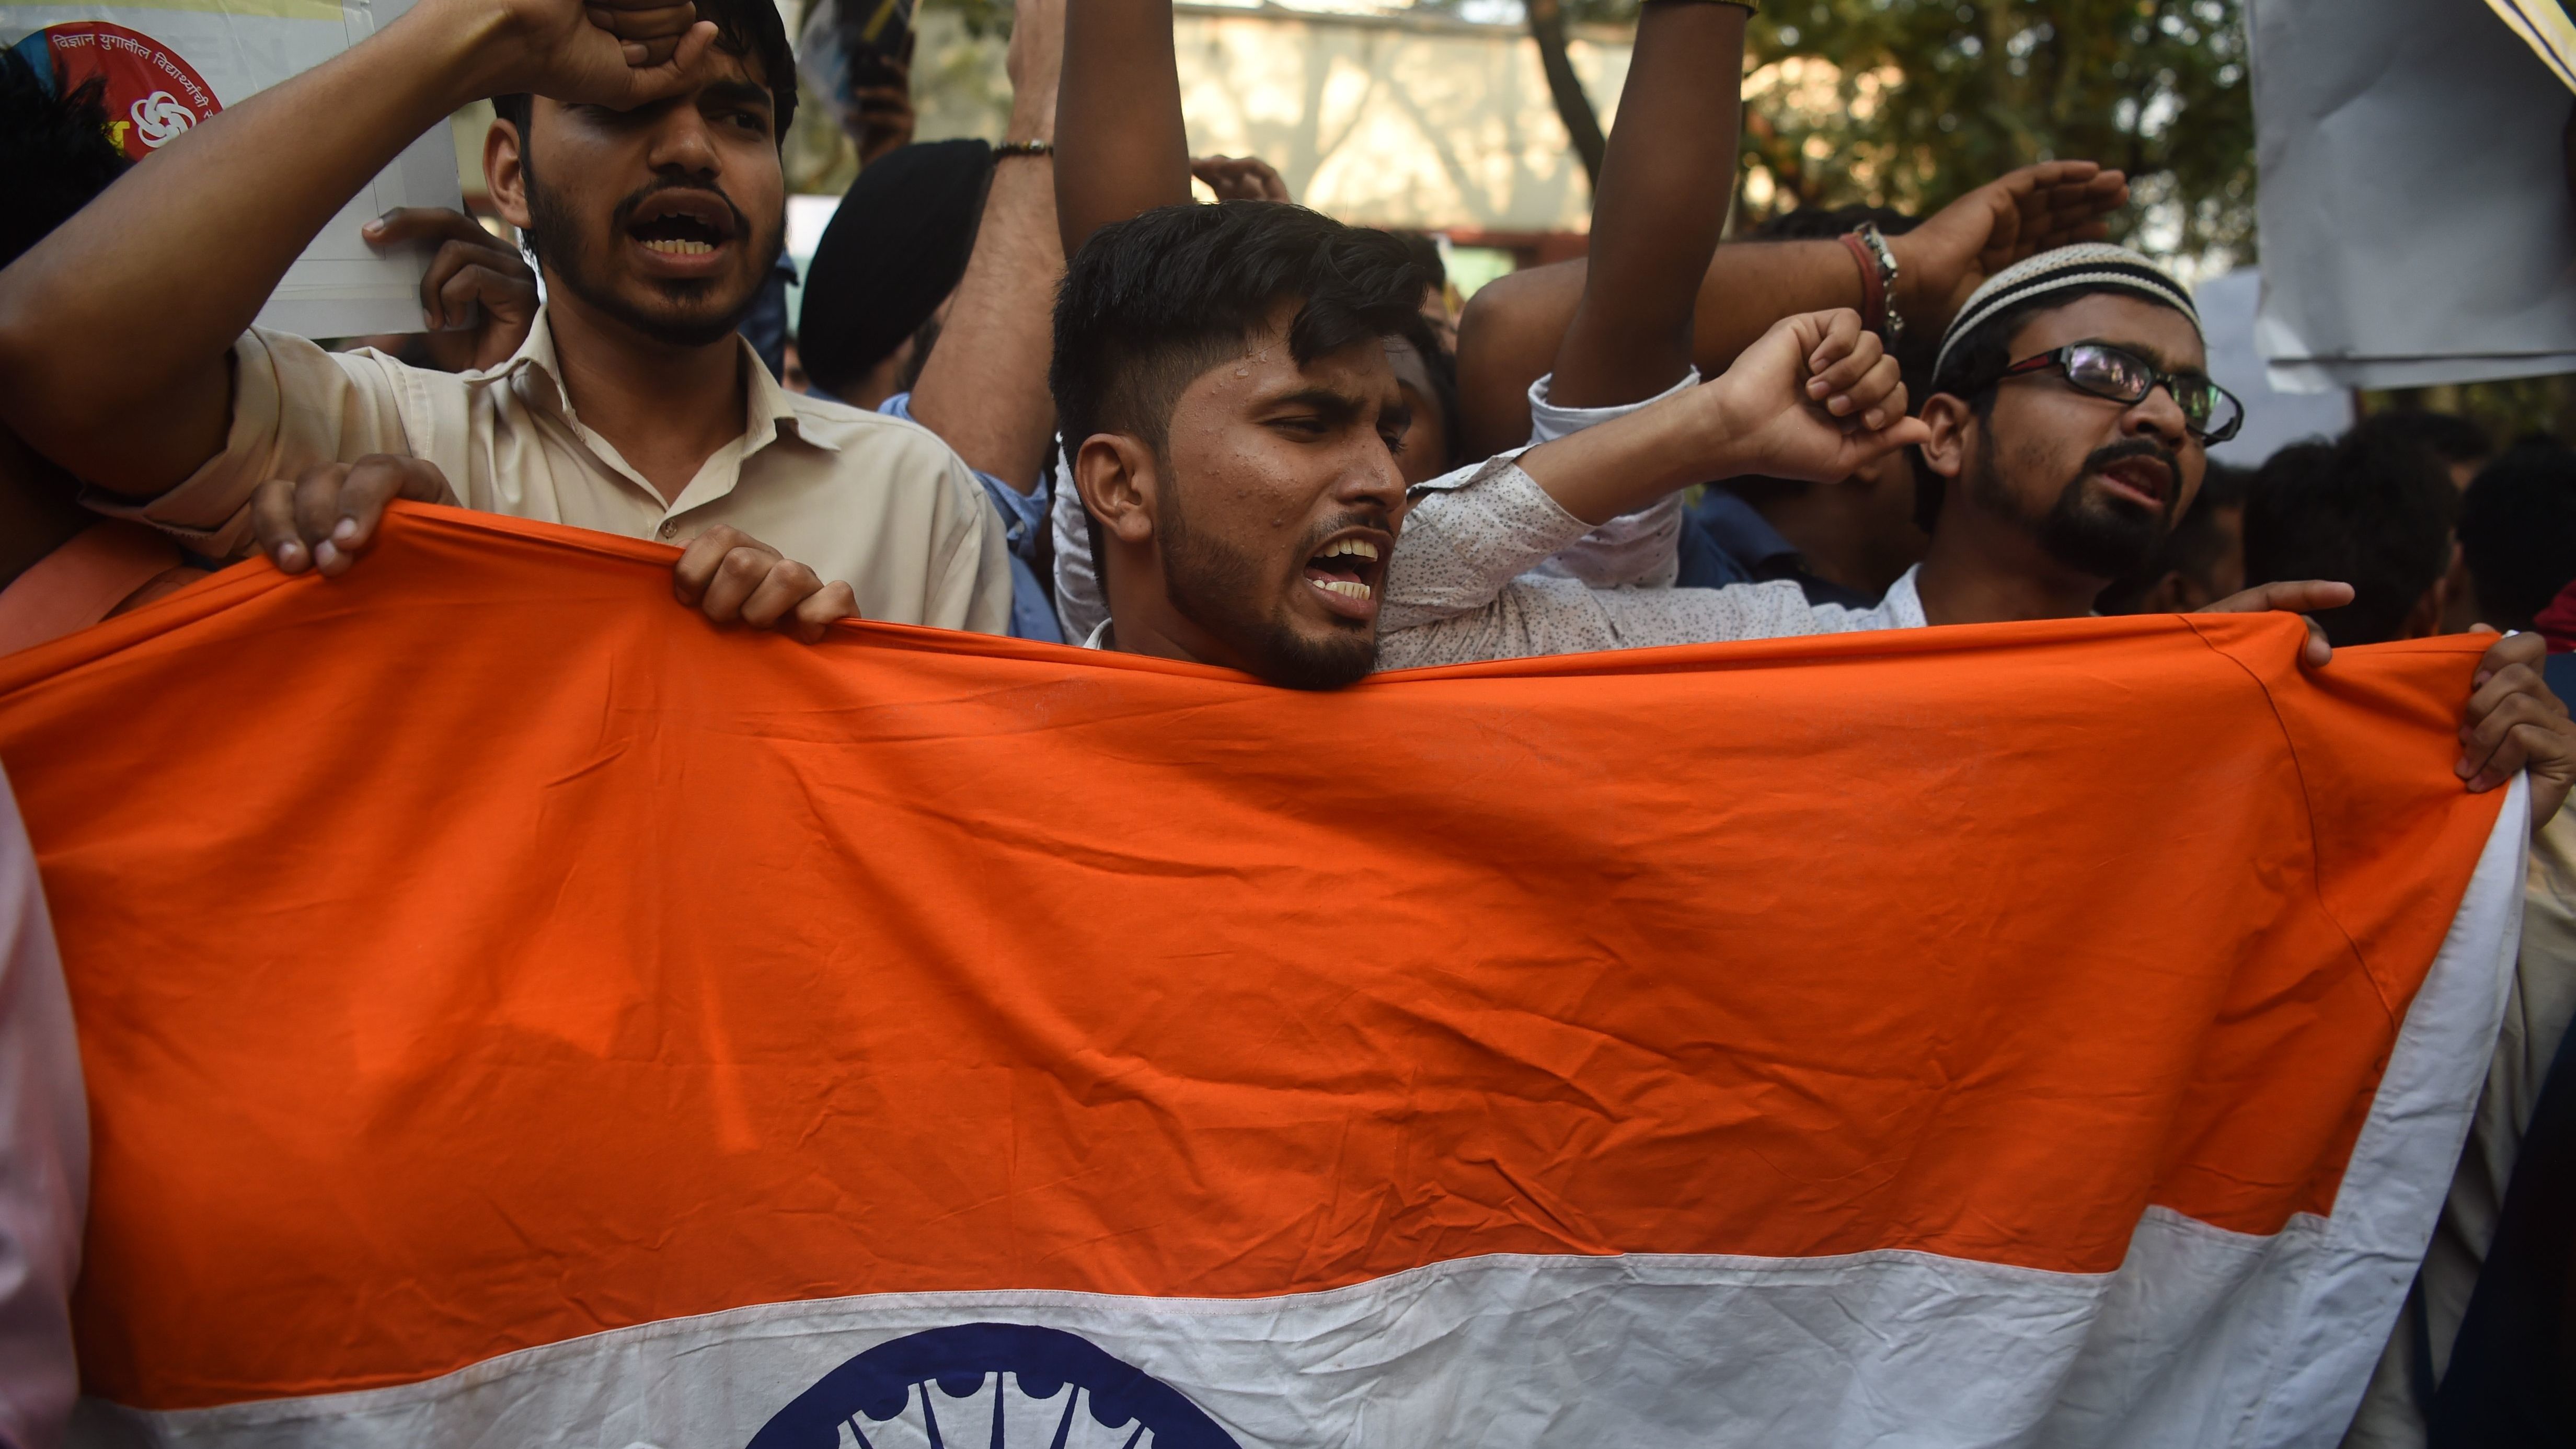 Anger Sweeps India over Amendment to Citizenship Law (AUDIO INTERVIEW)